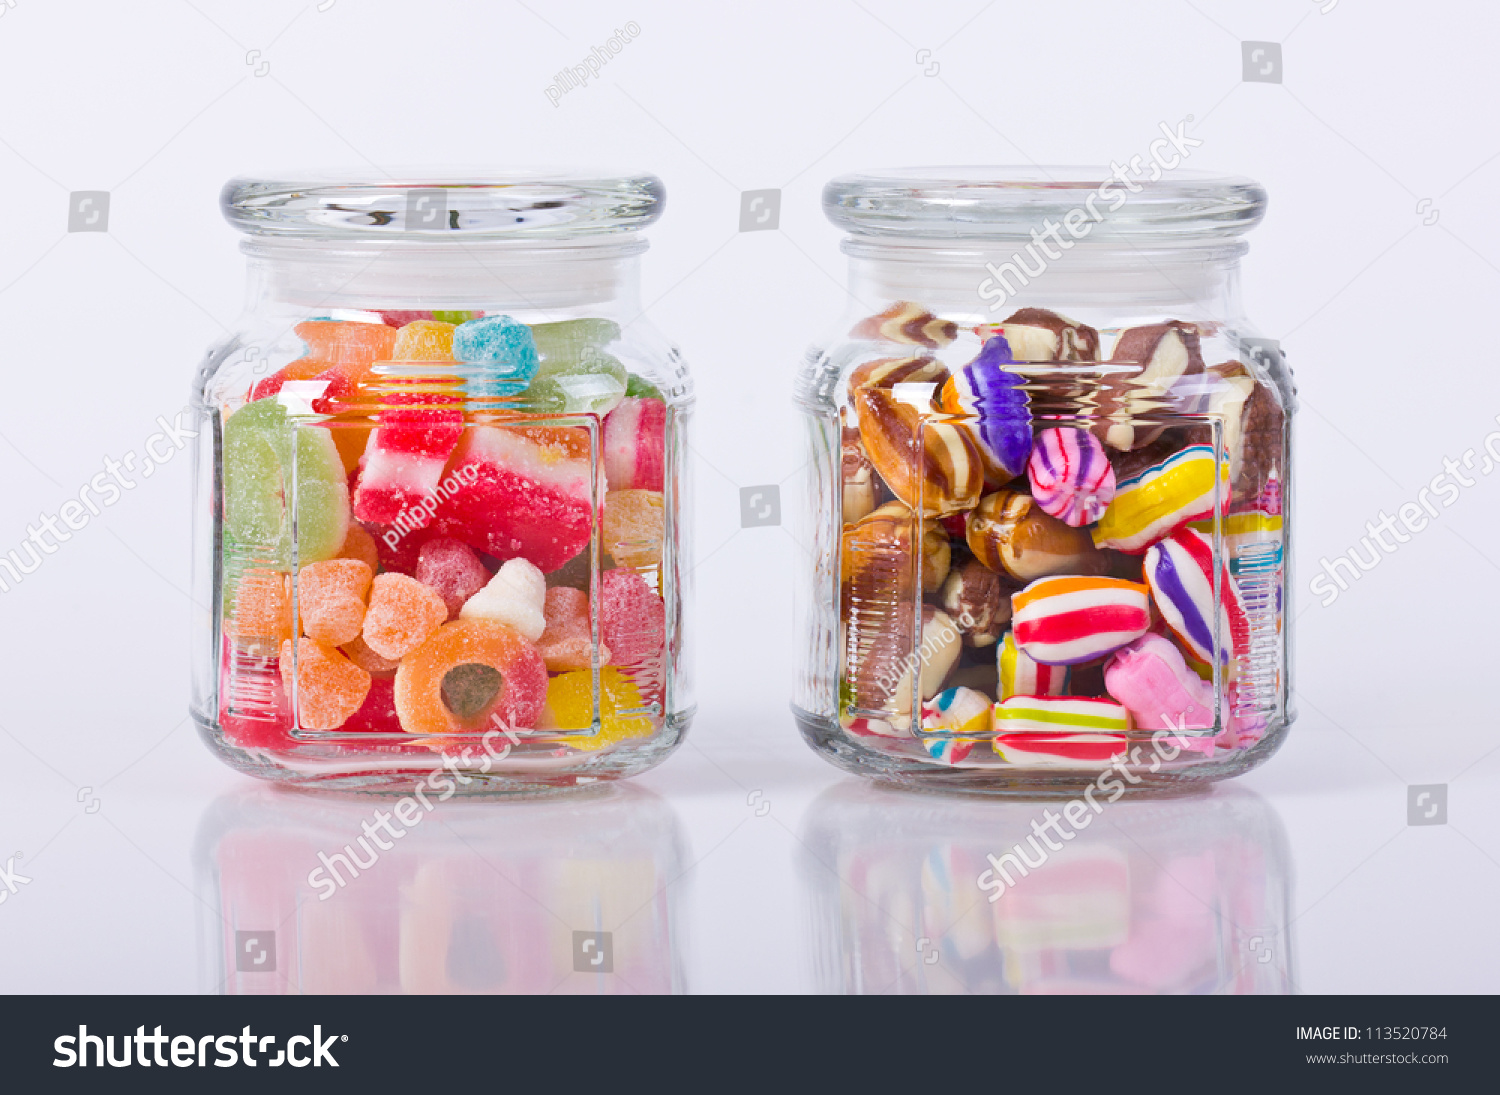 Download Colorful Candies Jar Stock Photo Edit Now 113520784 PSD Mockup Templates